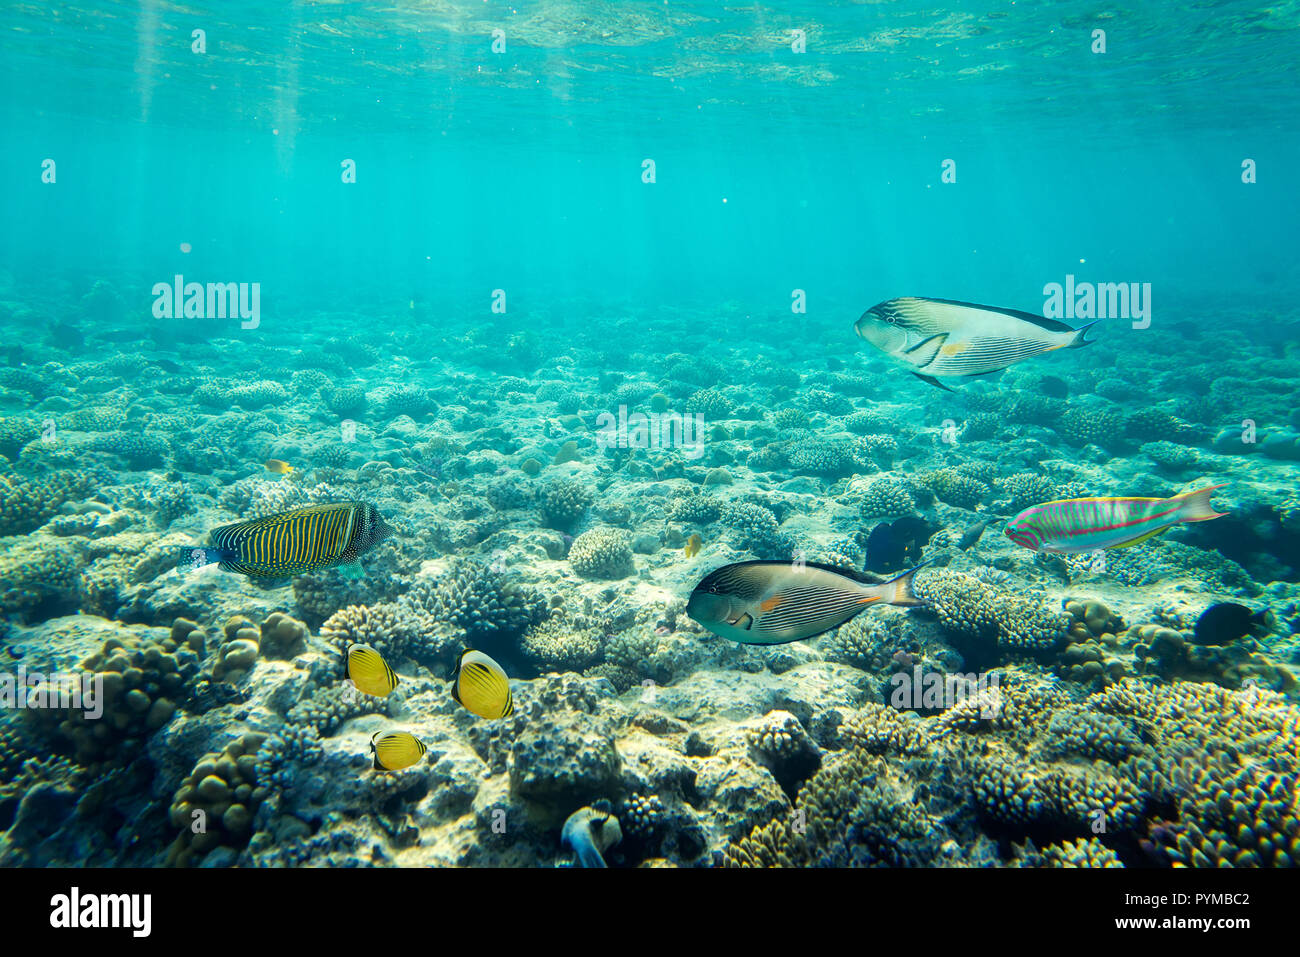 coral reef under water Stock Photo